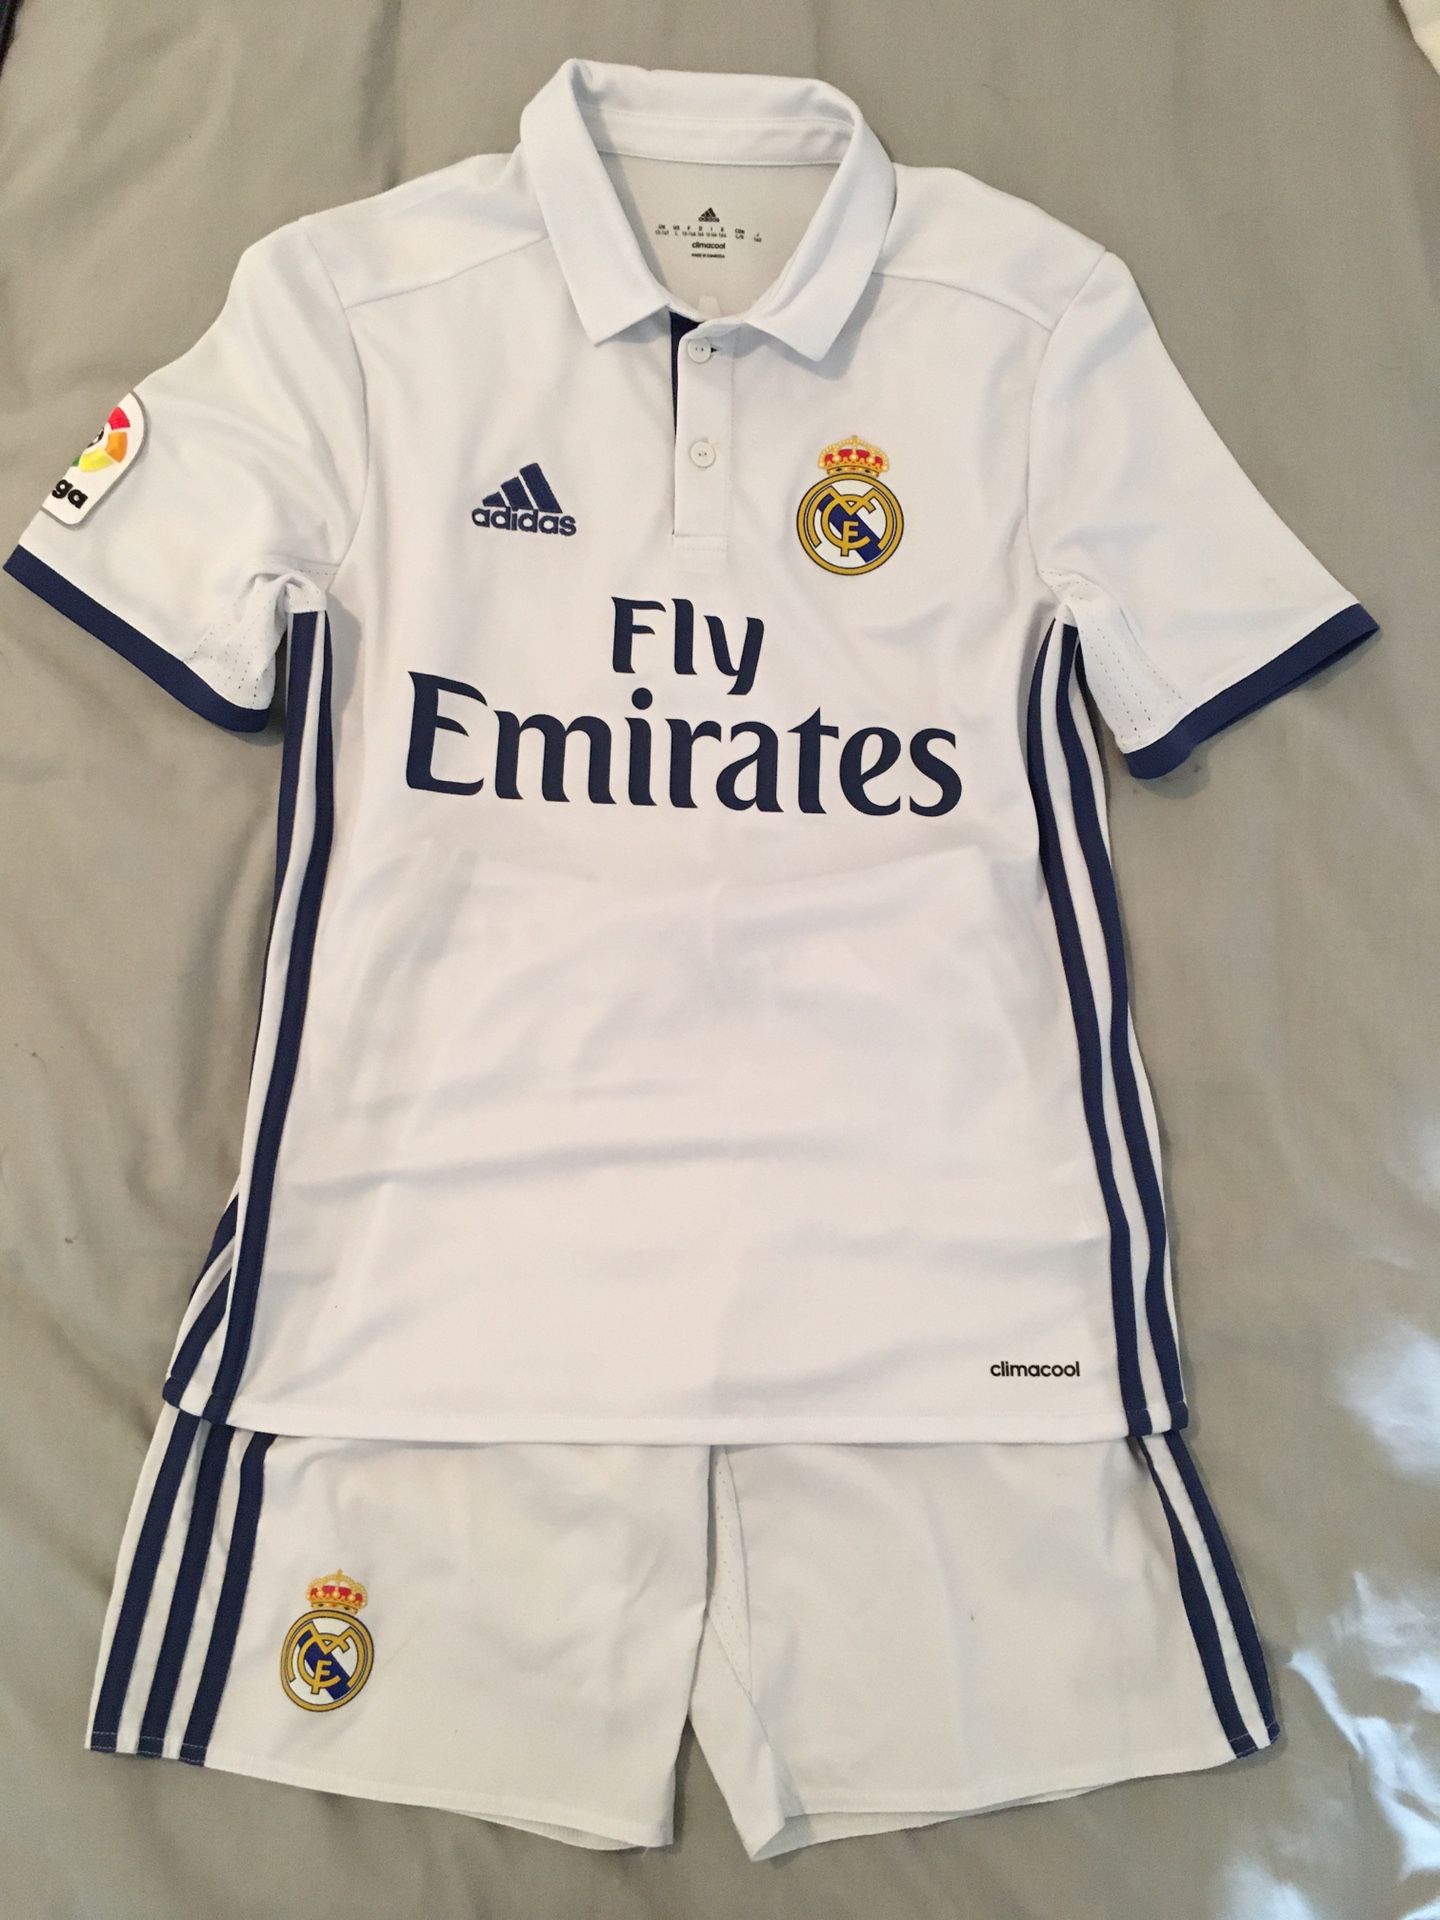 Genuine Real Madrid Youth soccer outfit.